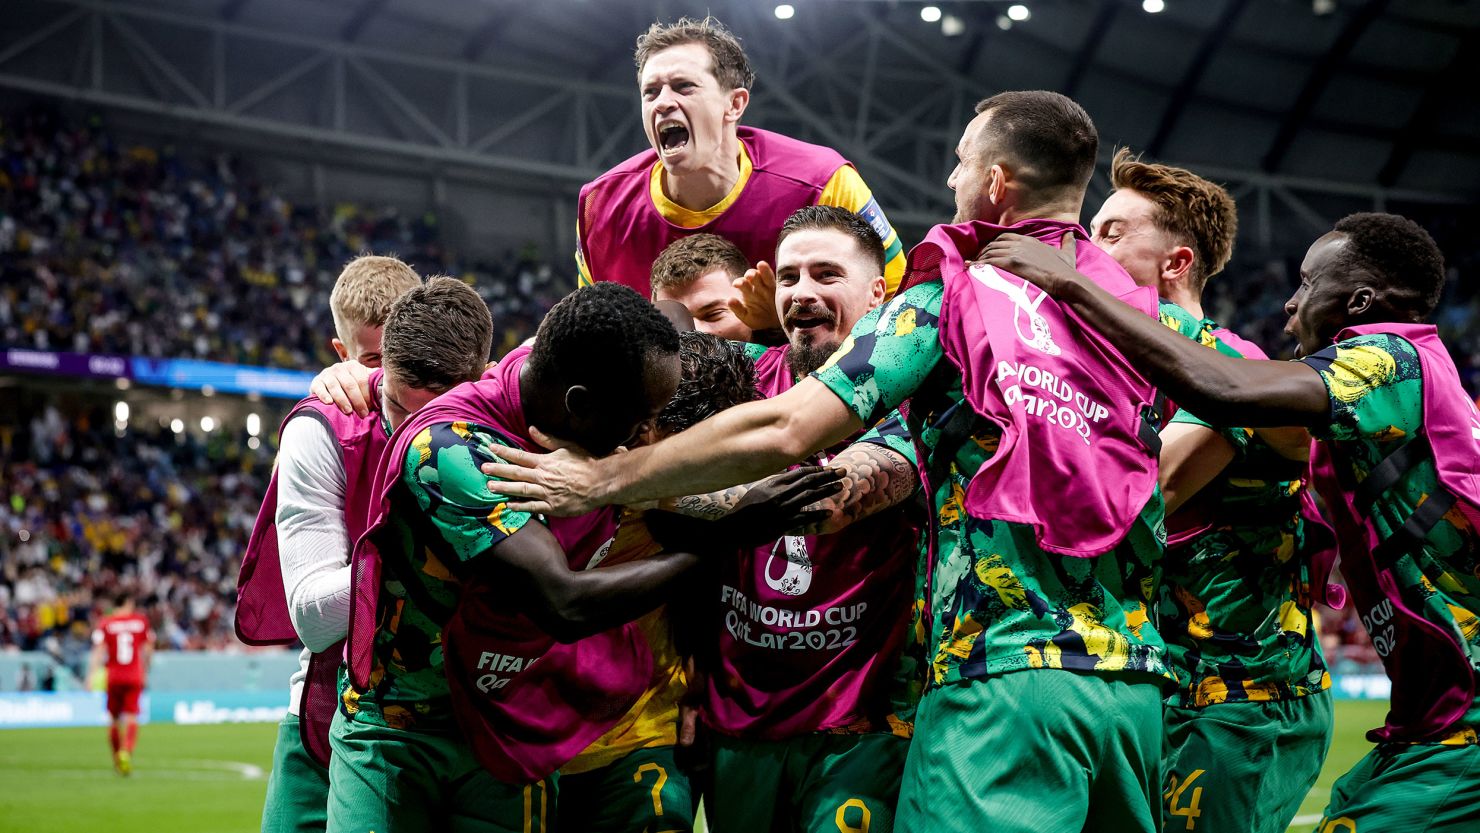 Australia qualified for the knockout stages, defeating Denmark.